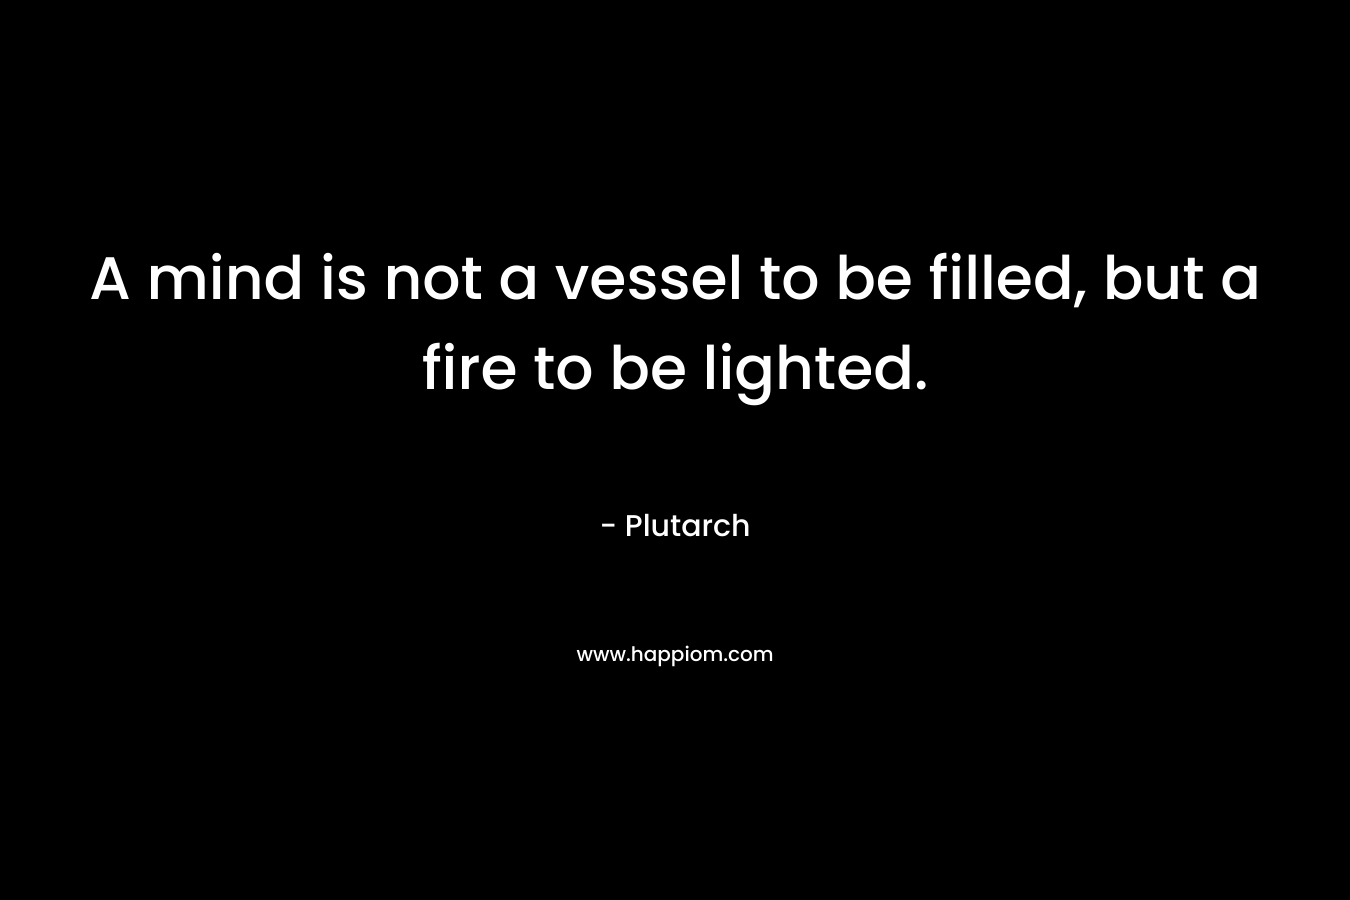 A mind is not a vessel to be filled, but a fire to be lighted. – Plutarch